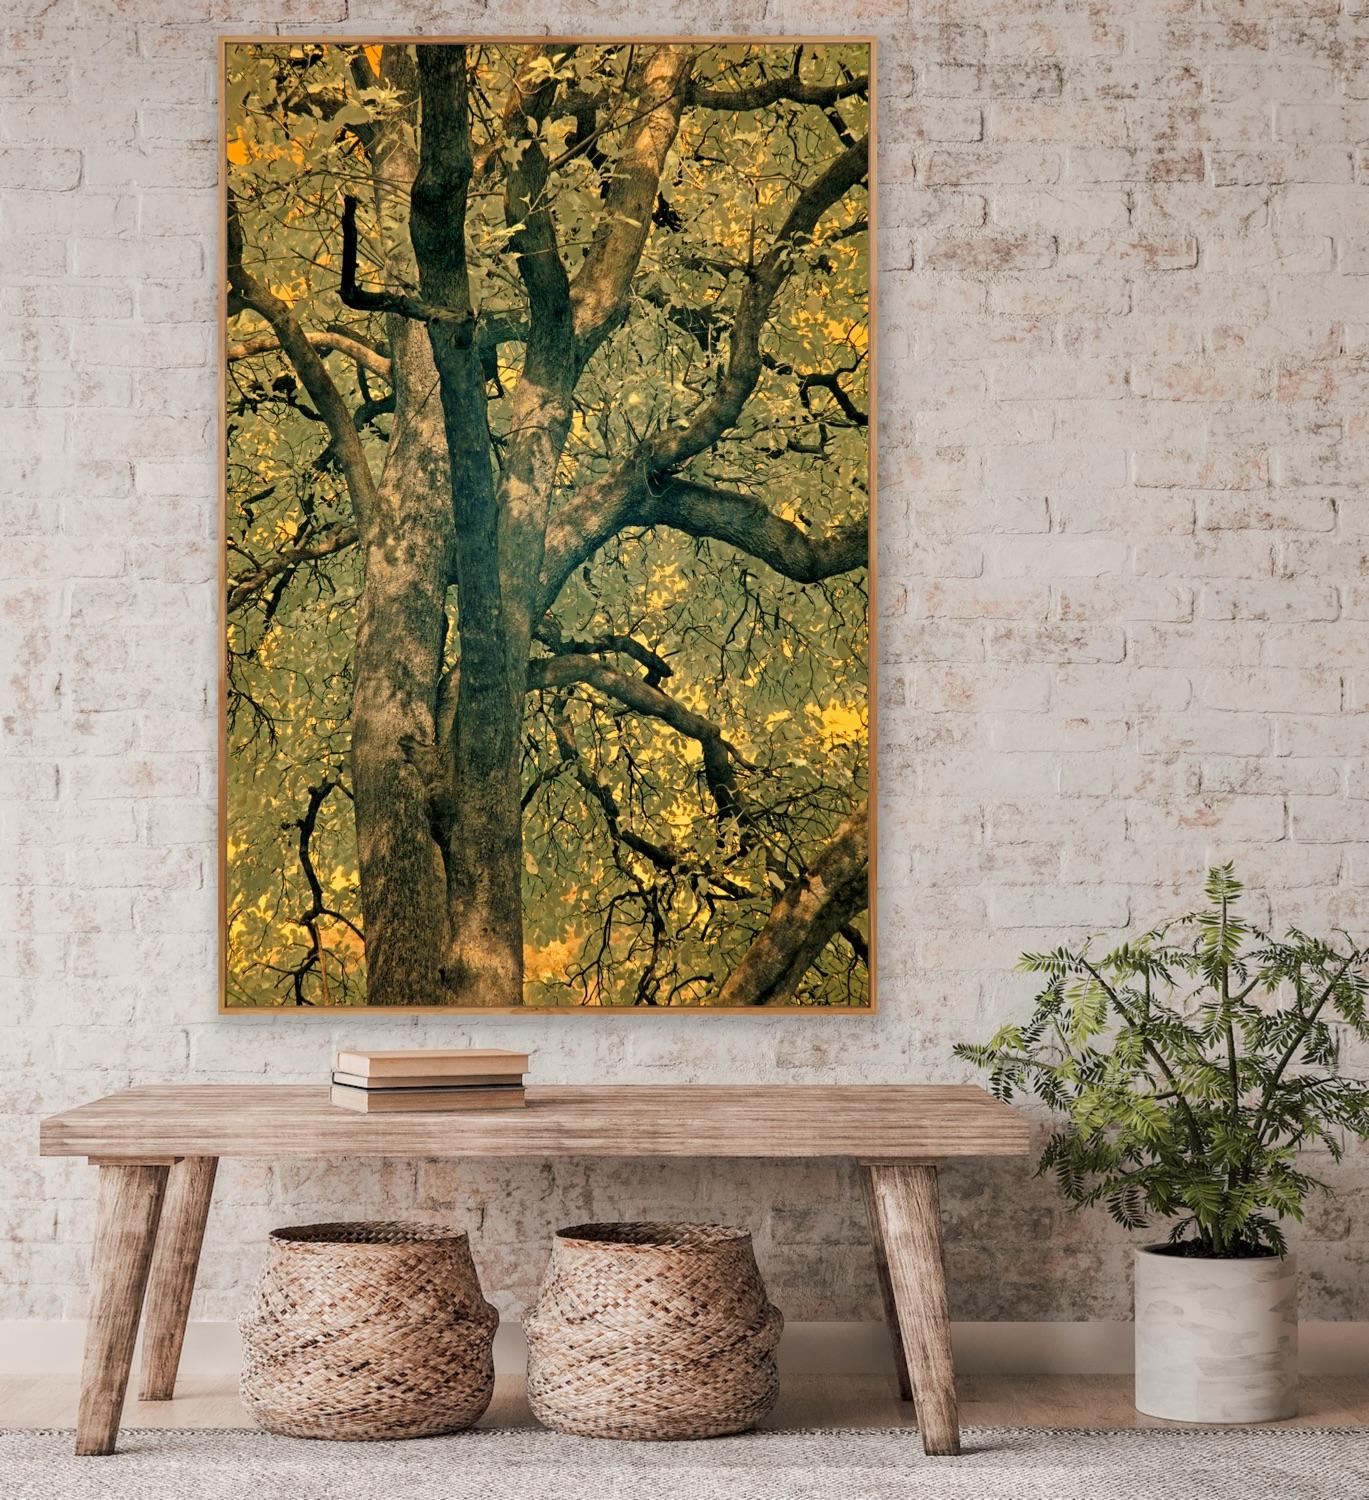 Large Landscape Tree Nature Wildlife Photograph India Orange Green Yellow Forest For Sale 14